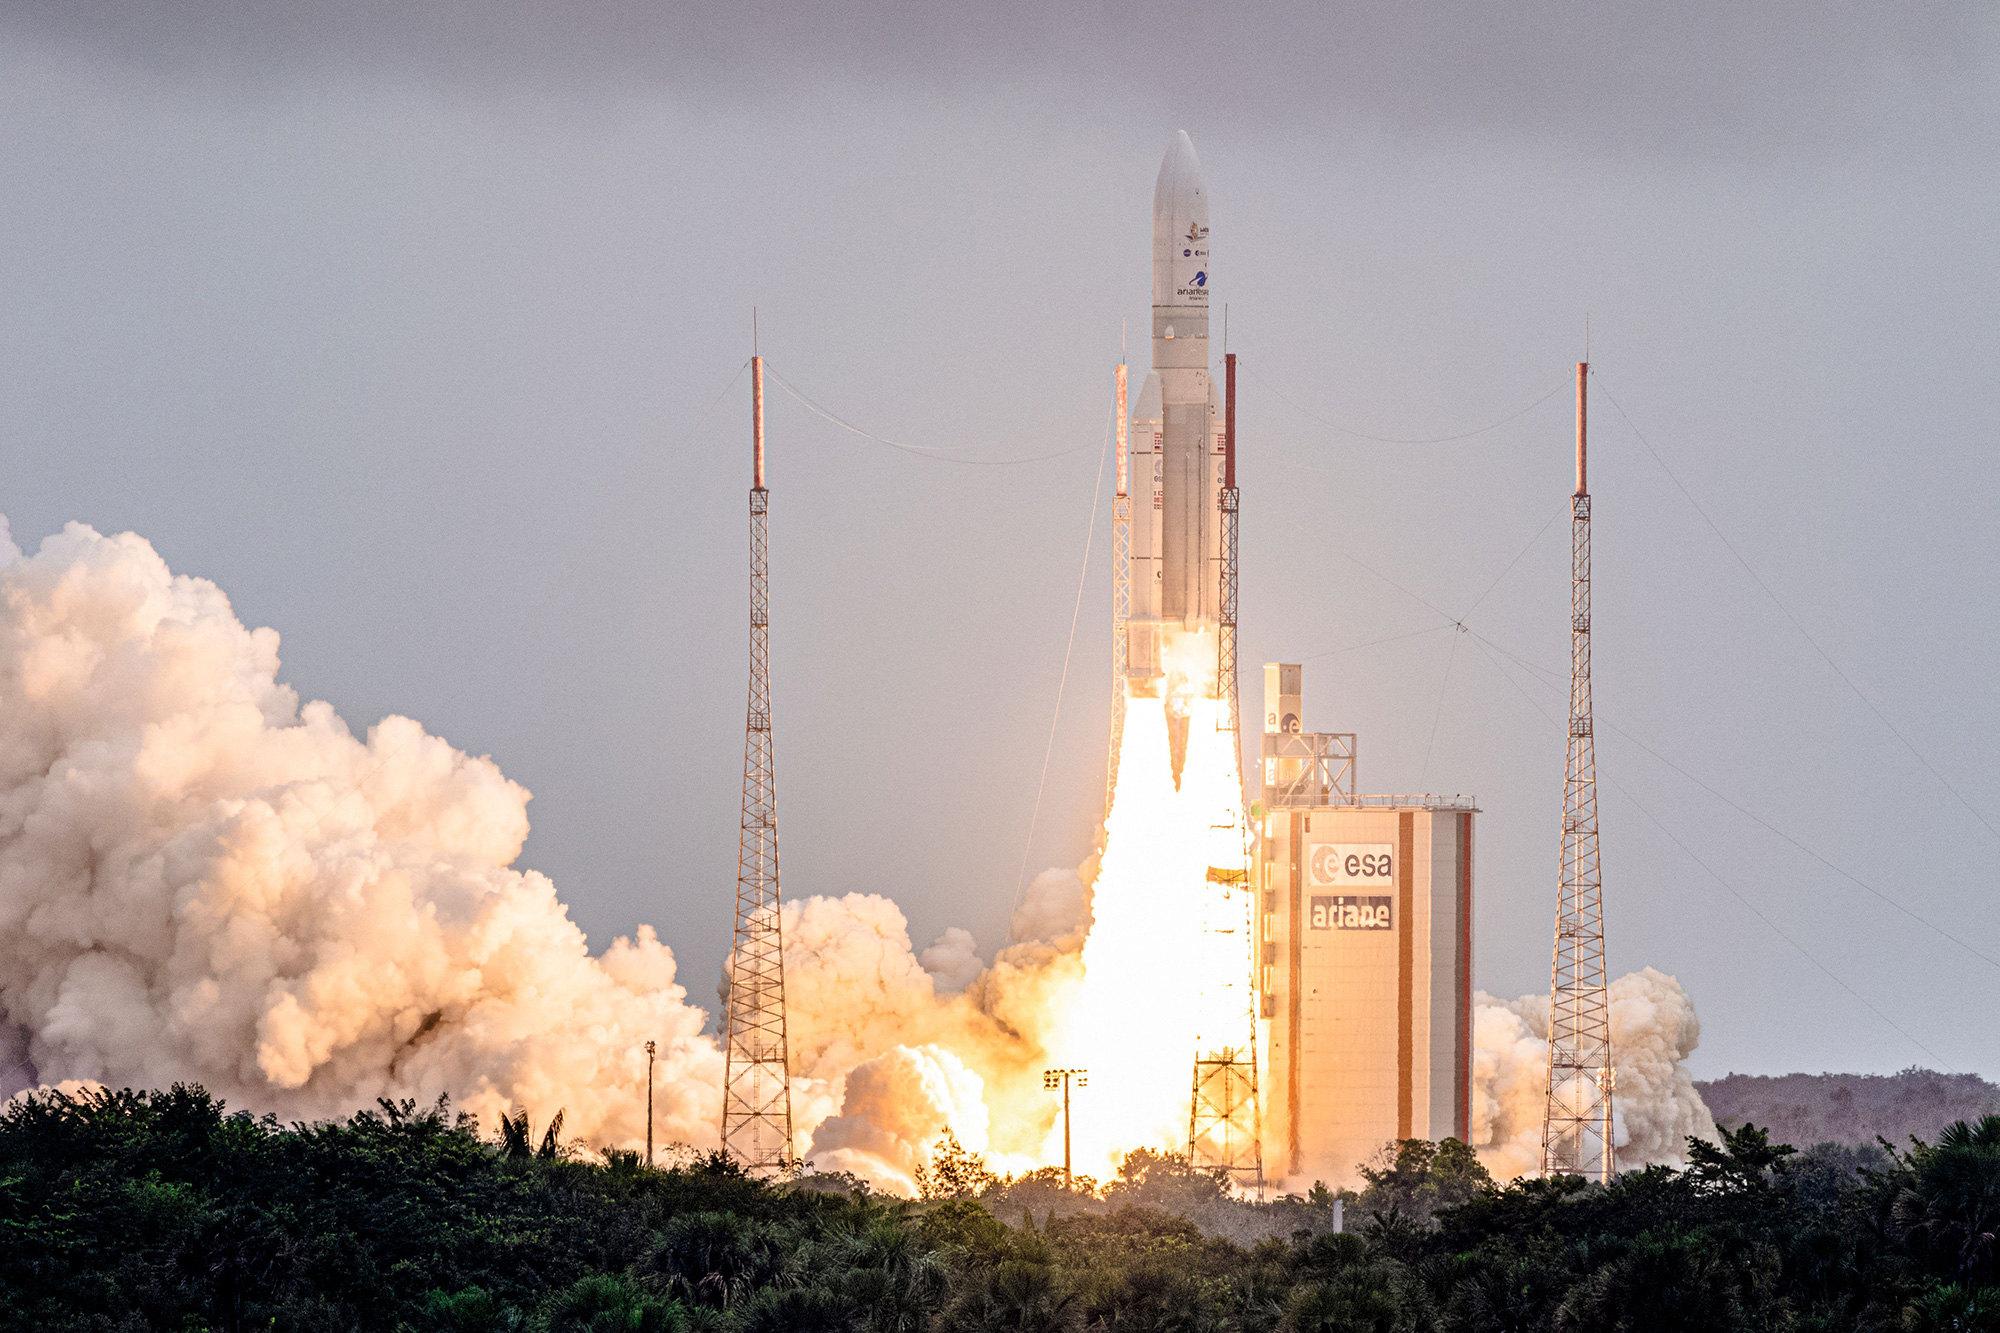 Arianespace's Ariane 5 rocket with NASAs James Webb Space Telescope onboard lifts up from the launchpad, at the Europes Spaceport, the Guiana Space Center in Kourou, French Guiana, on December 25, 2021. 